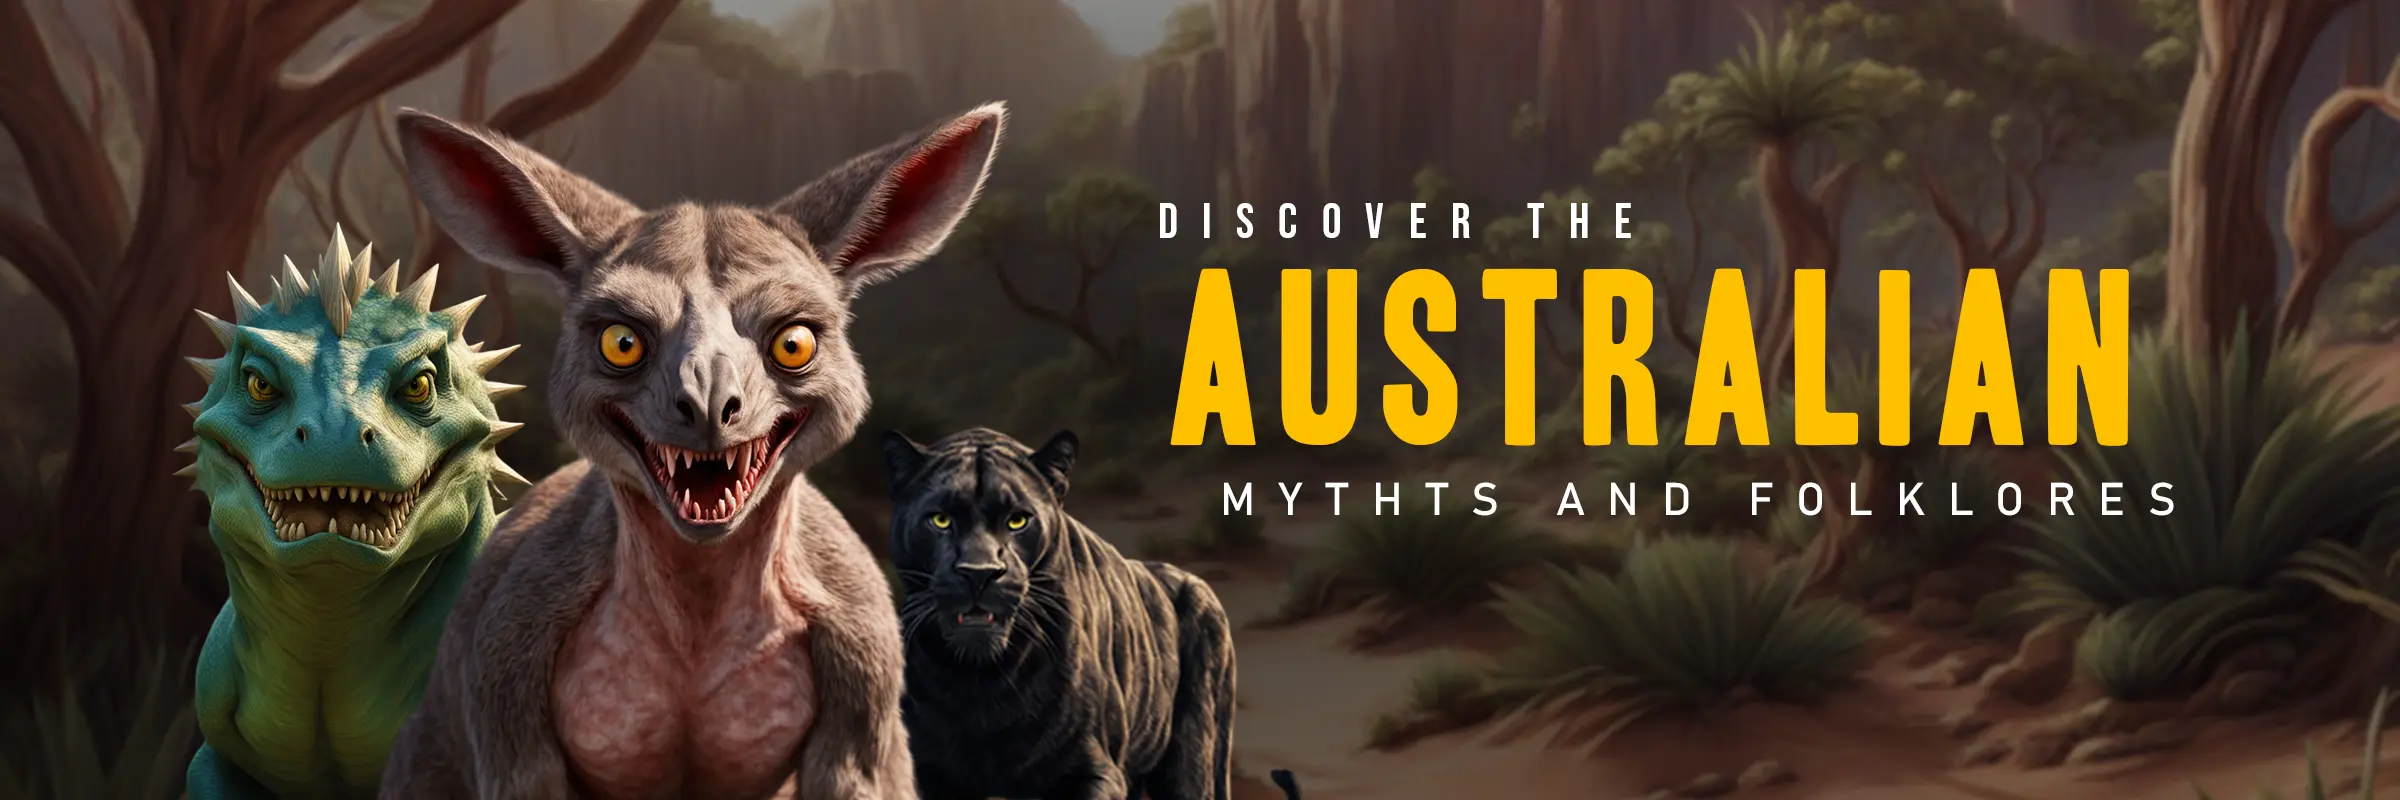 AUSTRALIAN MYTHS AND FOLKLORE